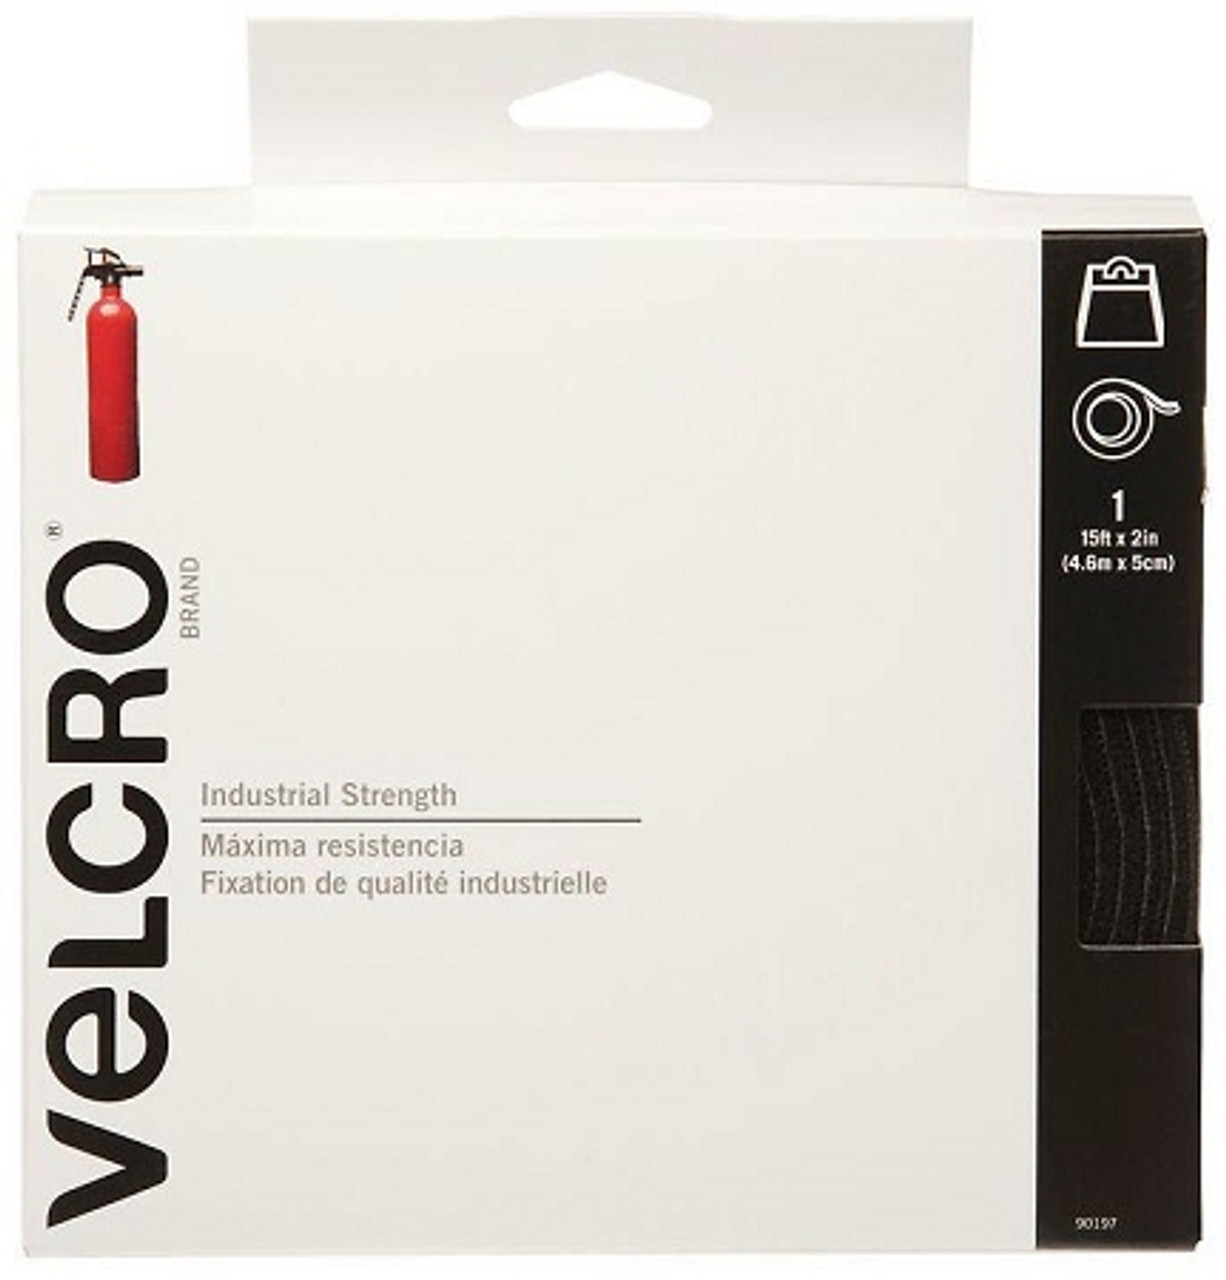 VELCRO Brand - Industrial Strength Indoor & Outdoor Use Superior Holding  Power on Smooth Surfaces Size 10ft x 2in Tape, White - Pack of 1